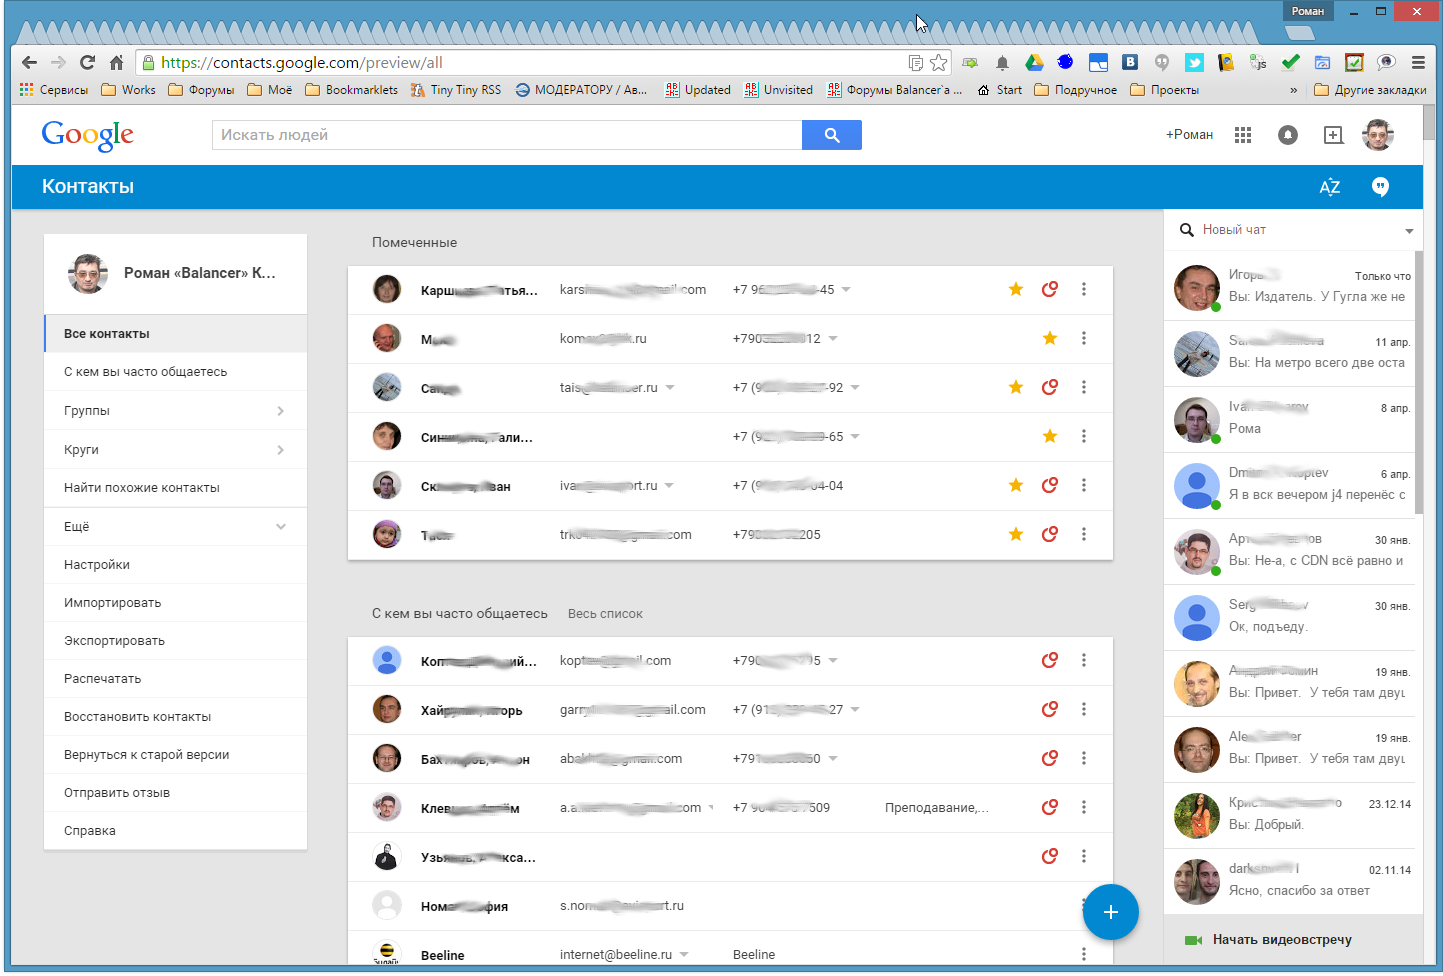 Google-Contacts-2015-04-14_16-36-06.png